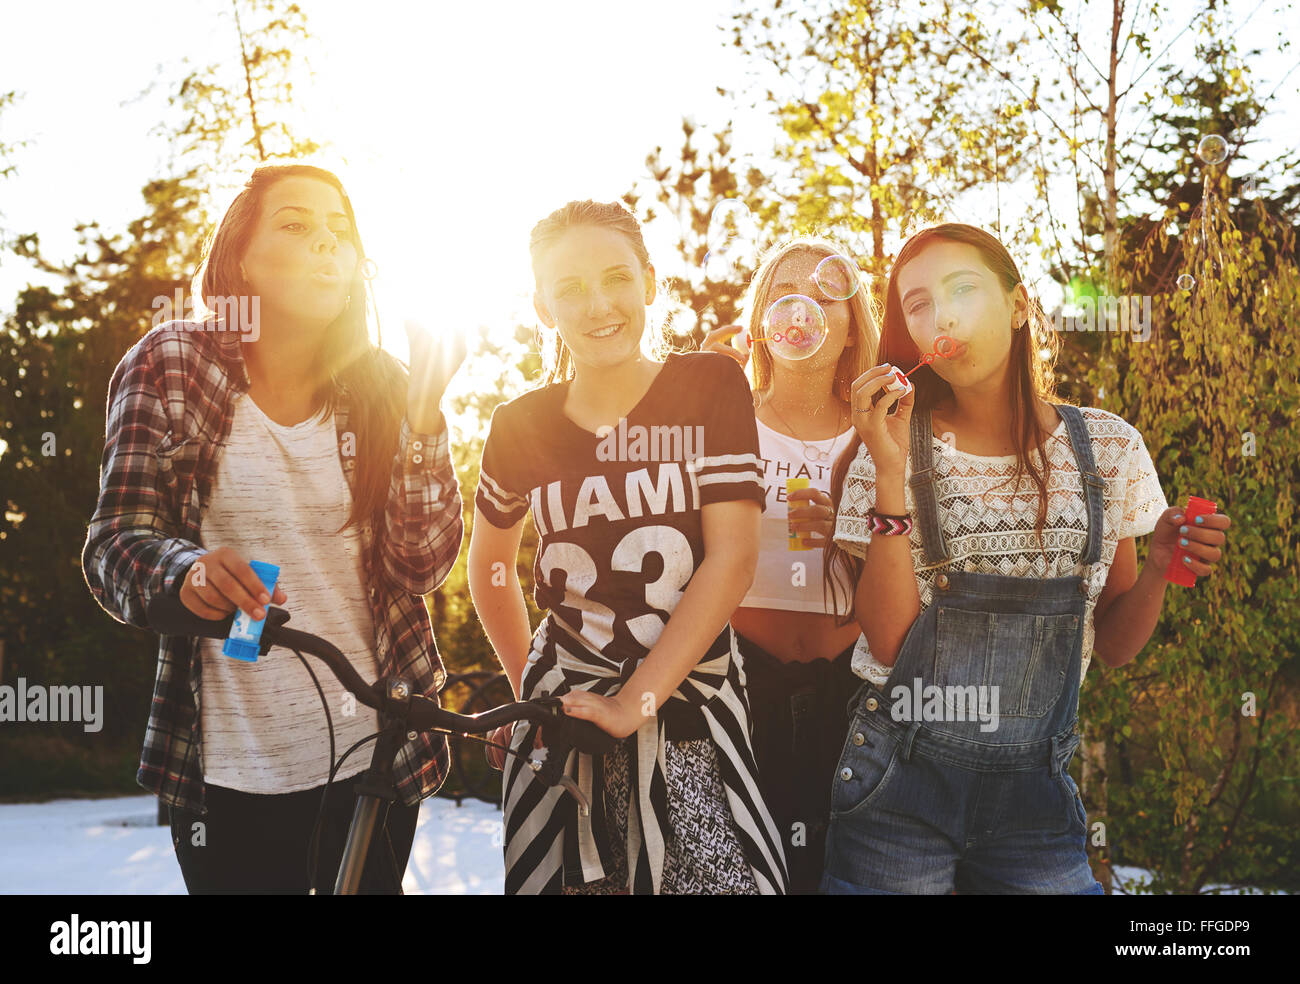 Teenagers having fun while posing for the camera outside Stock Photo